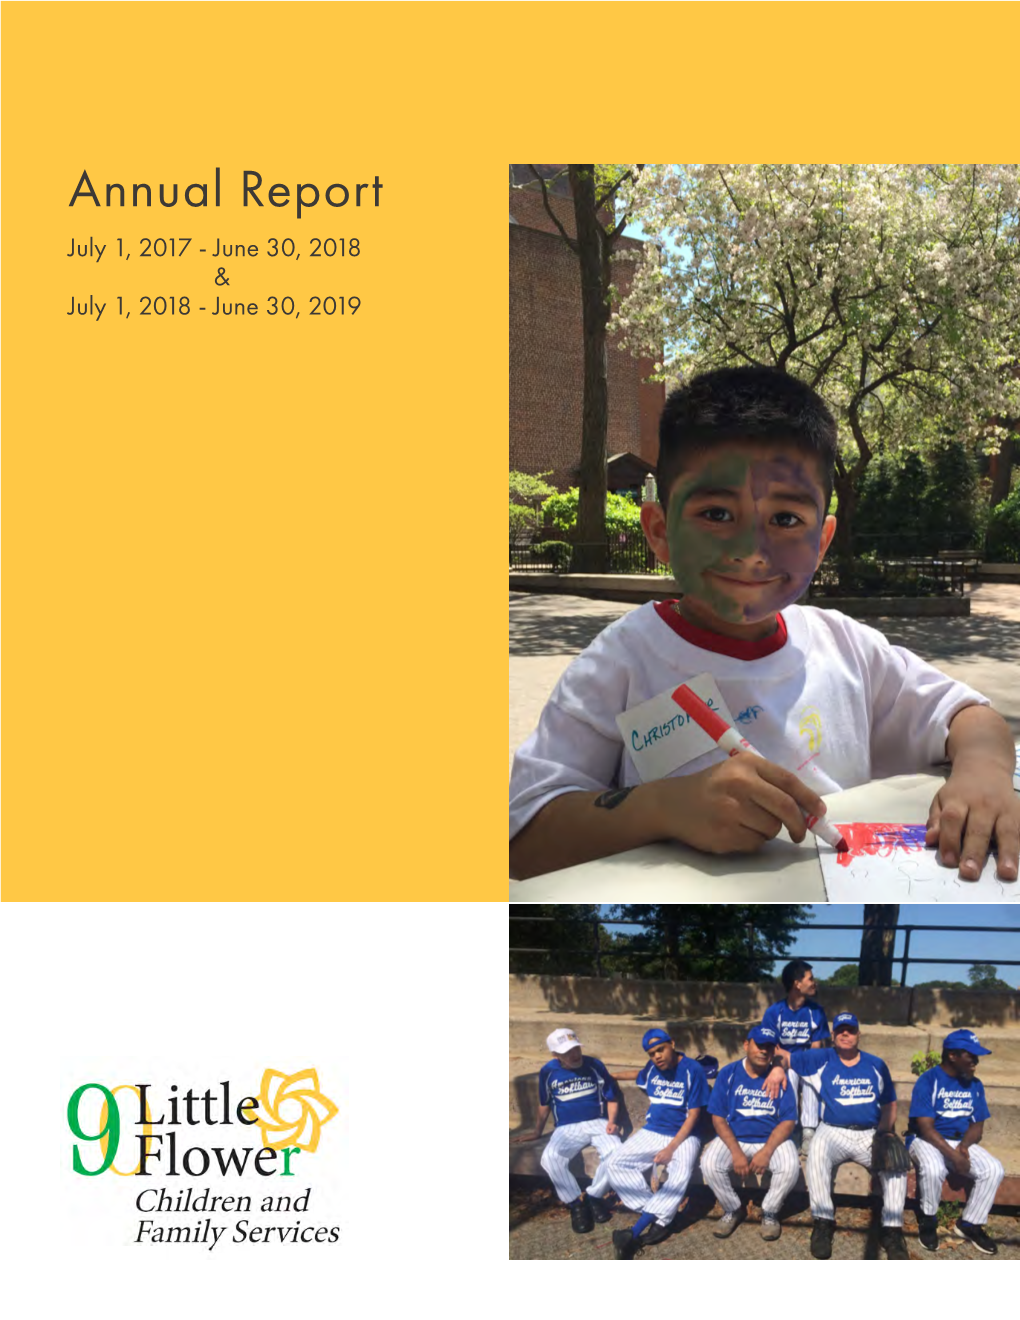 Annual Report July 1, 2017 - June 30, 2018 & July 1, 2018 - June 30, 2019 Our Mission